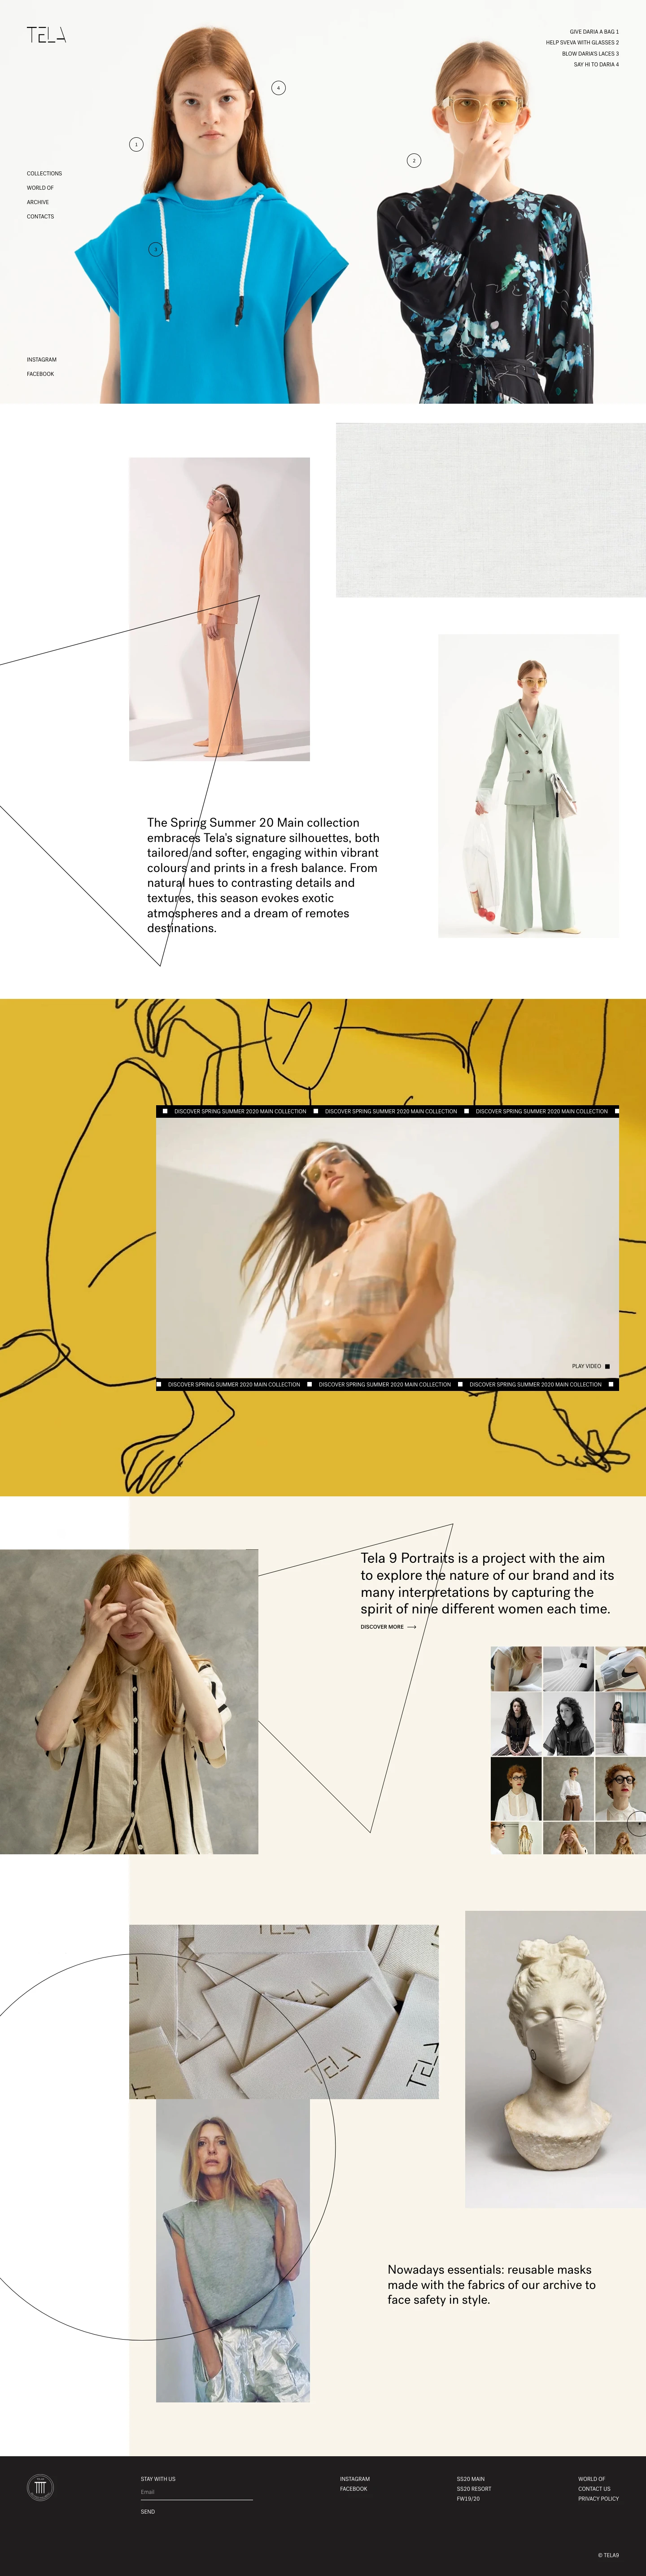 TELA9 Landing Page Example: Born in 2009, TELA is equivalent to a new project as the concept of a book to a writer, as well as a canvas to a painter. This does not mean that the project is anonymous nor generic but that it expresses its potentiality. TELA relaxed tailoring.